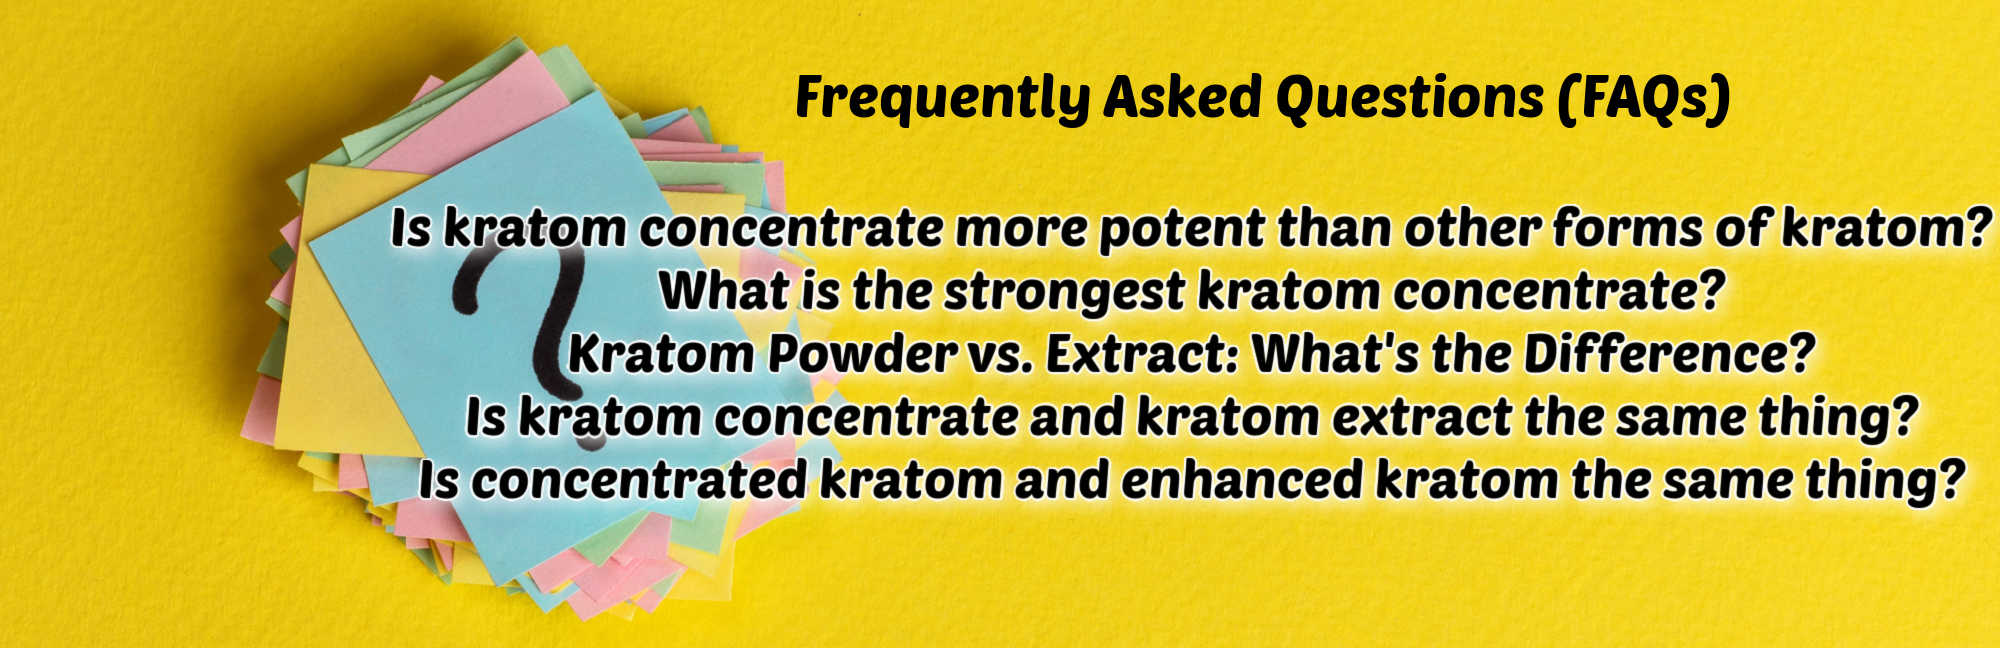 image of frequently asked questions about kratom concentrates